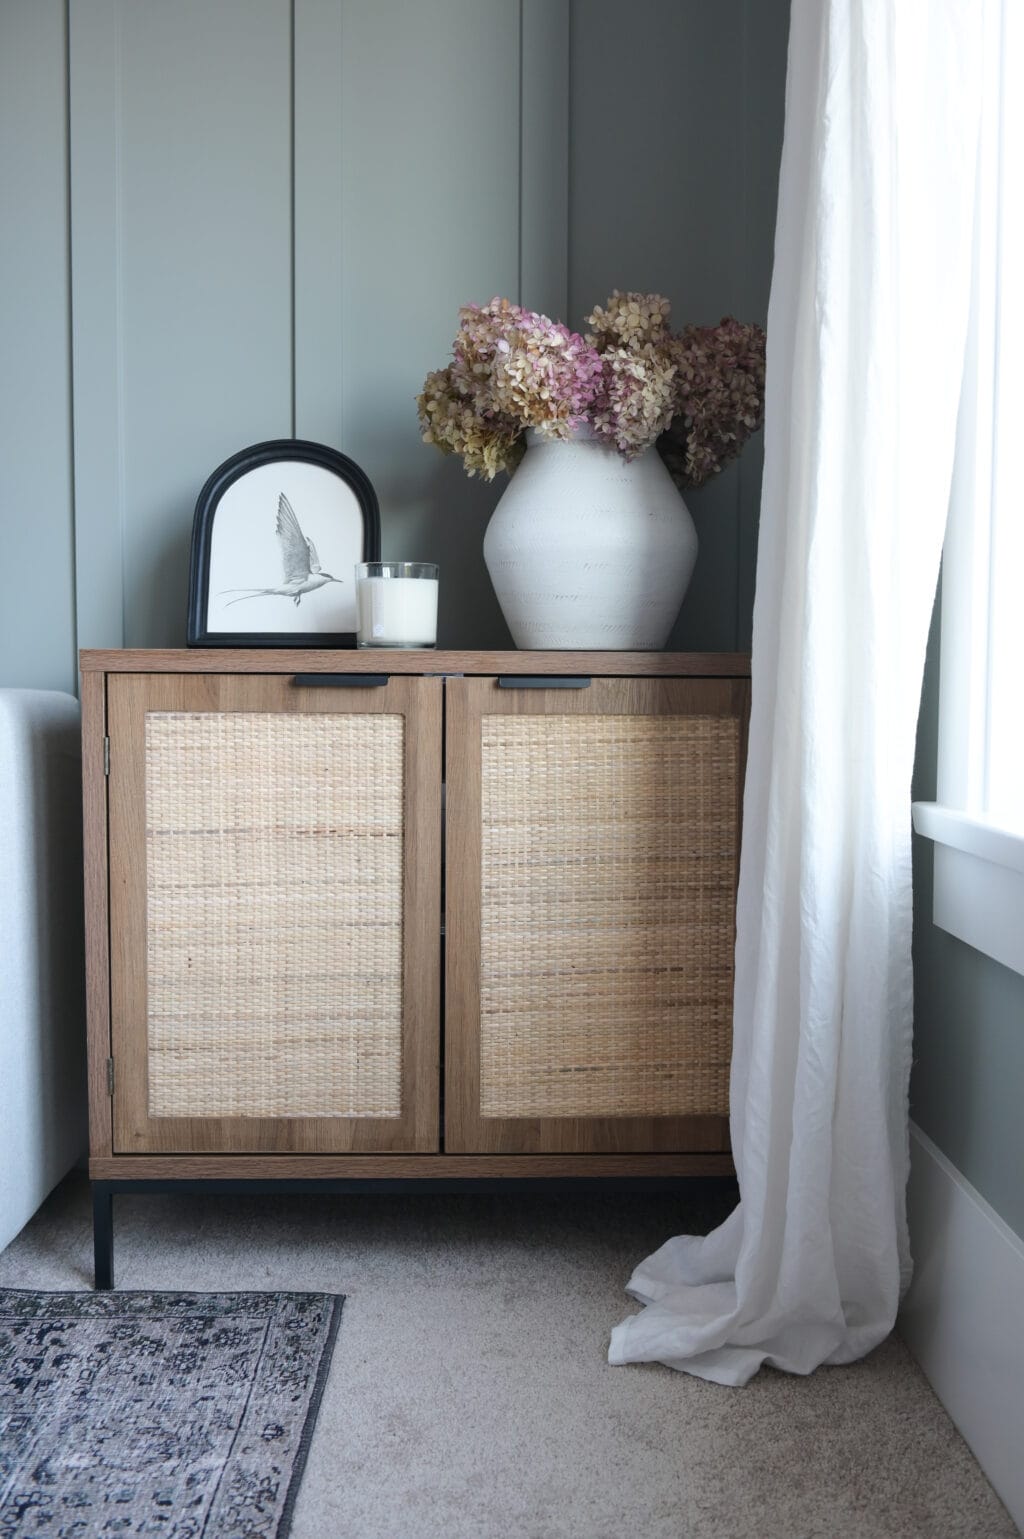 Cane nightstand with flowers